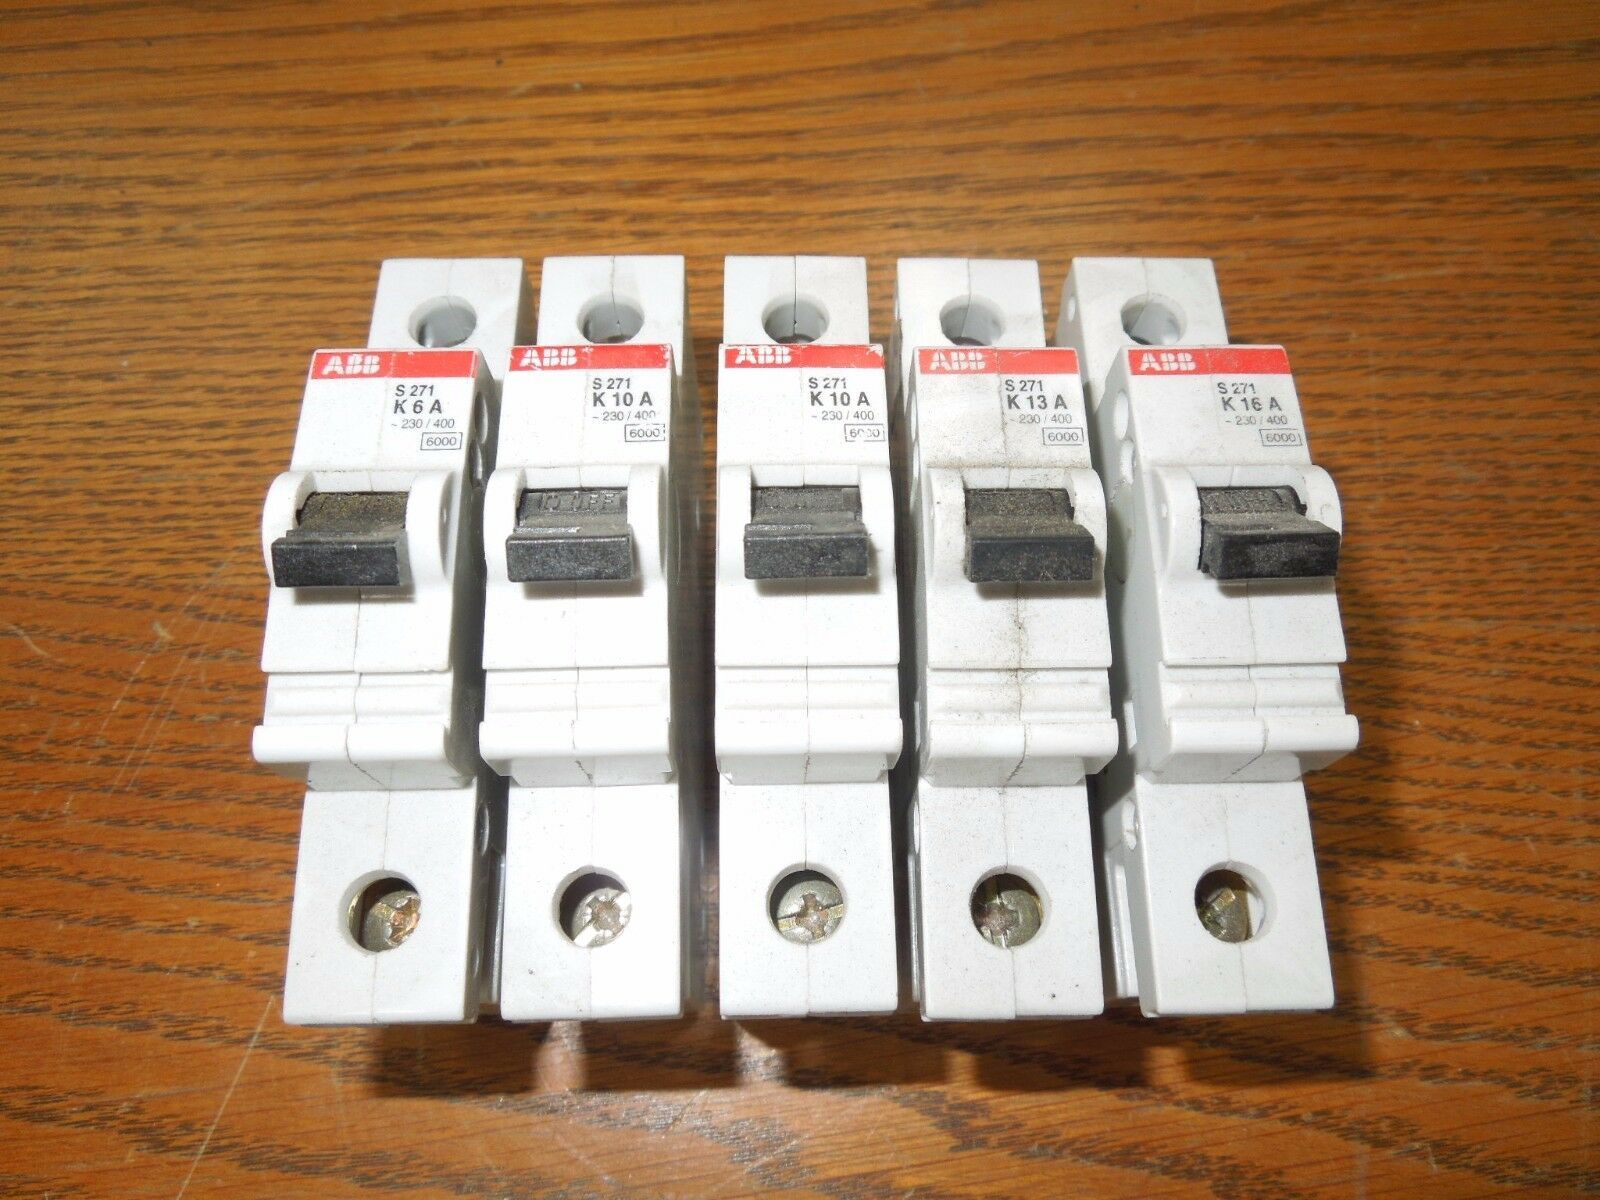 Primary image for Lot of 5- ABB S 271 K 1p Din Rail Mount Breakers (1- 6A, 2- 10A, 1- 13A, 1- 16A)